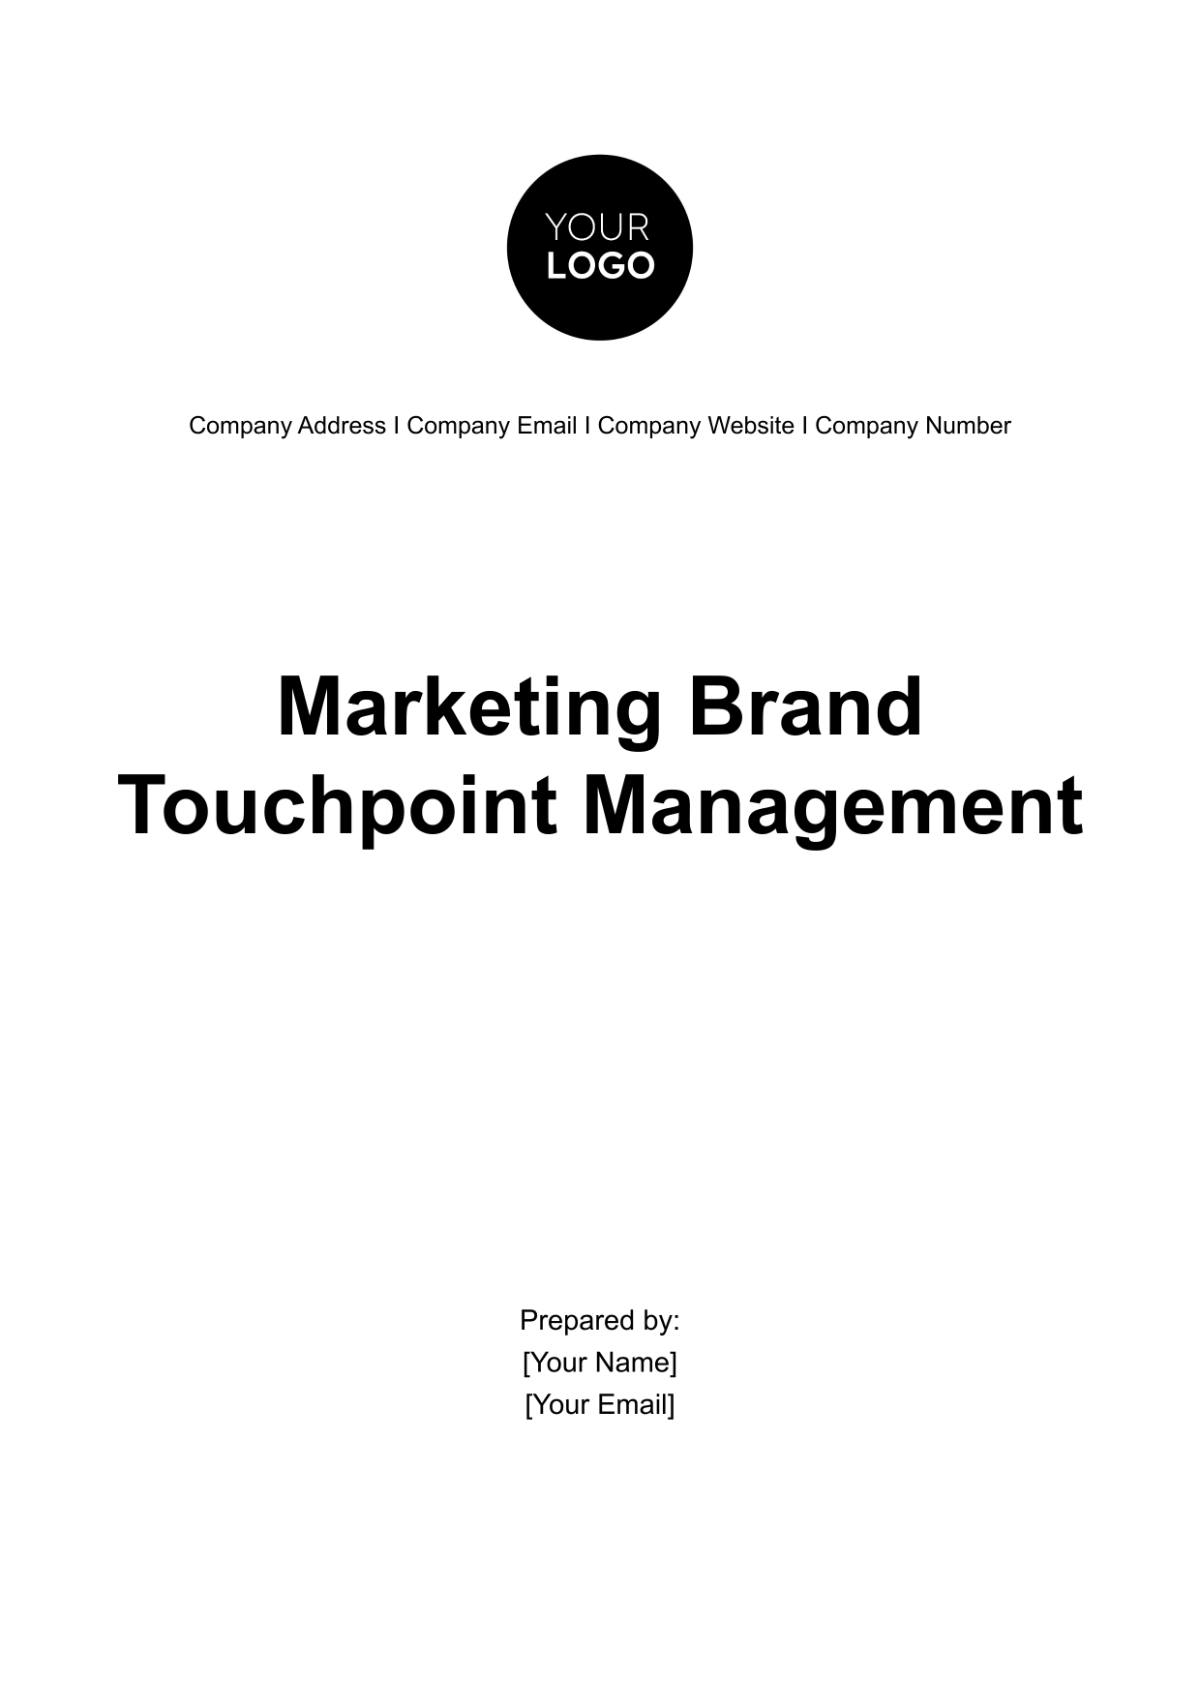 Free Marketing Brand Touchpoint Management Template